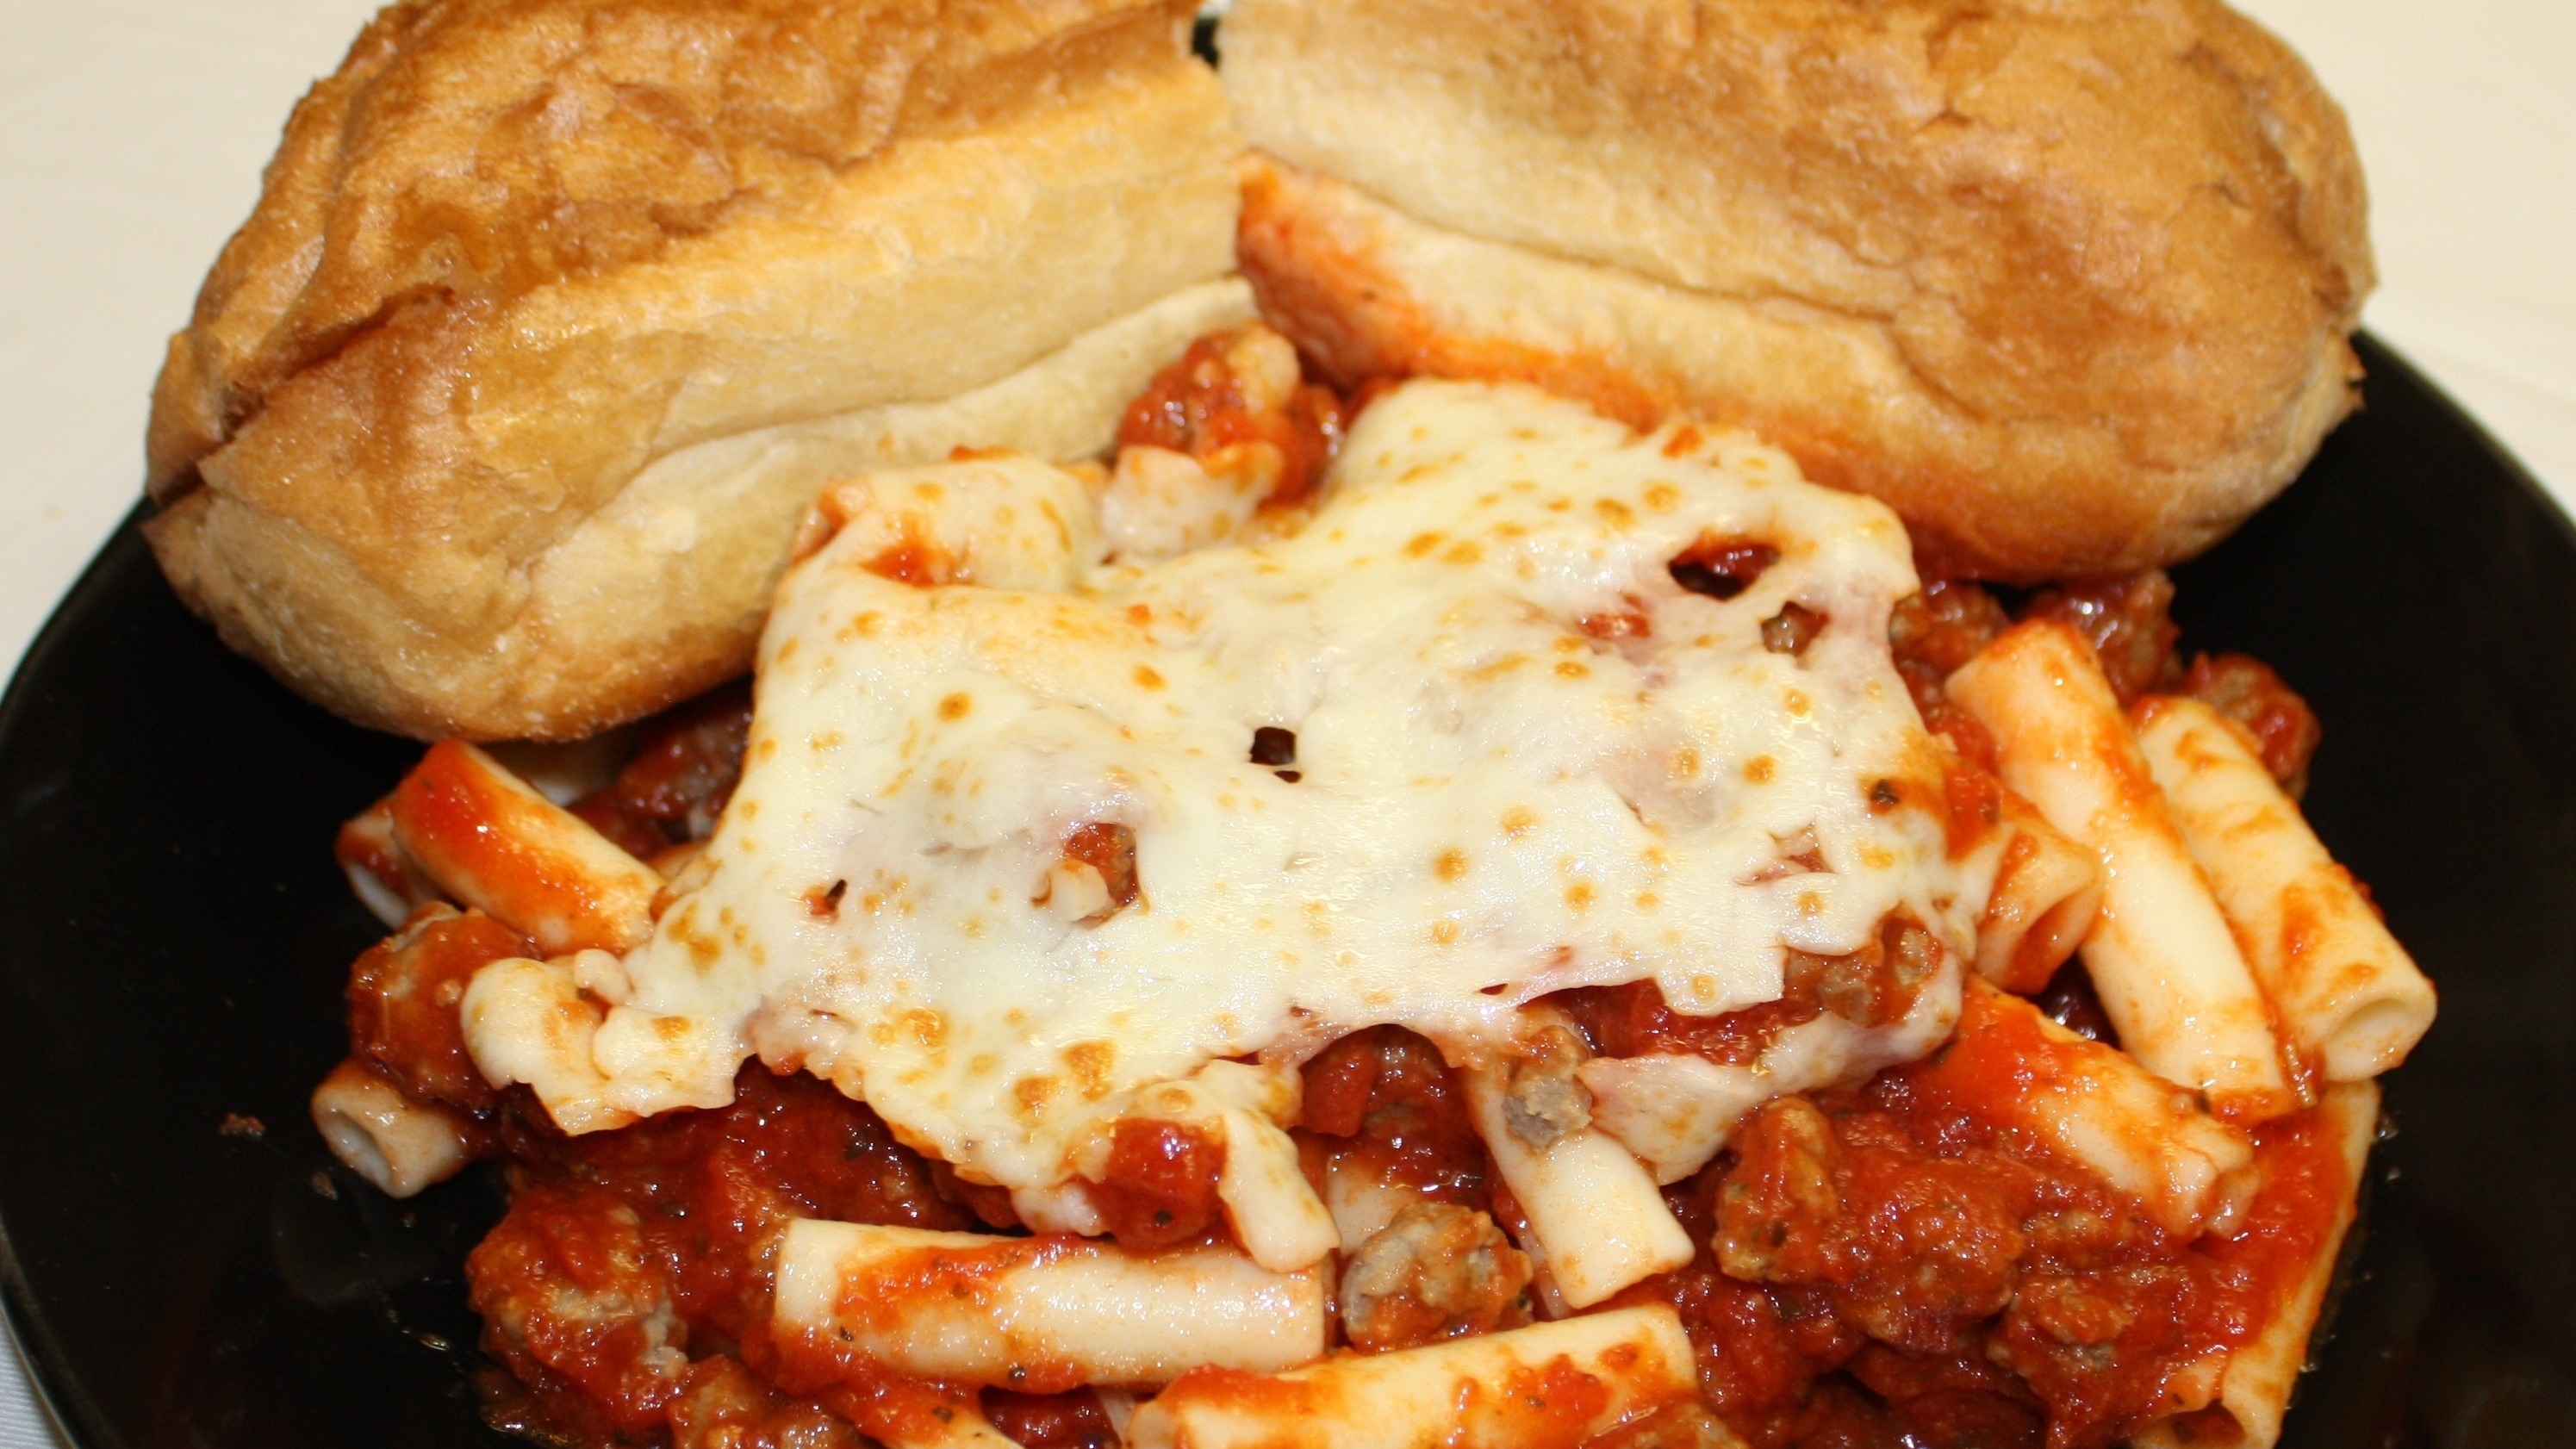 Baked Ziti with Beef